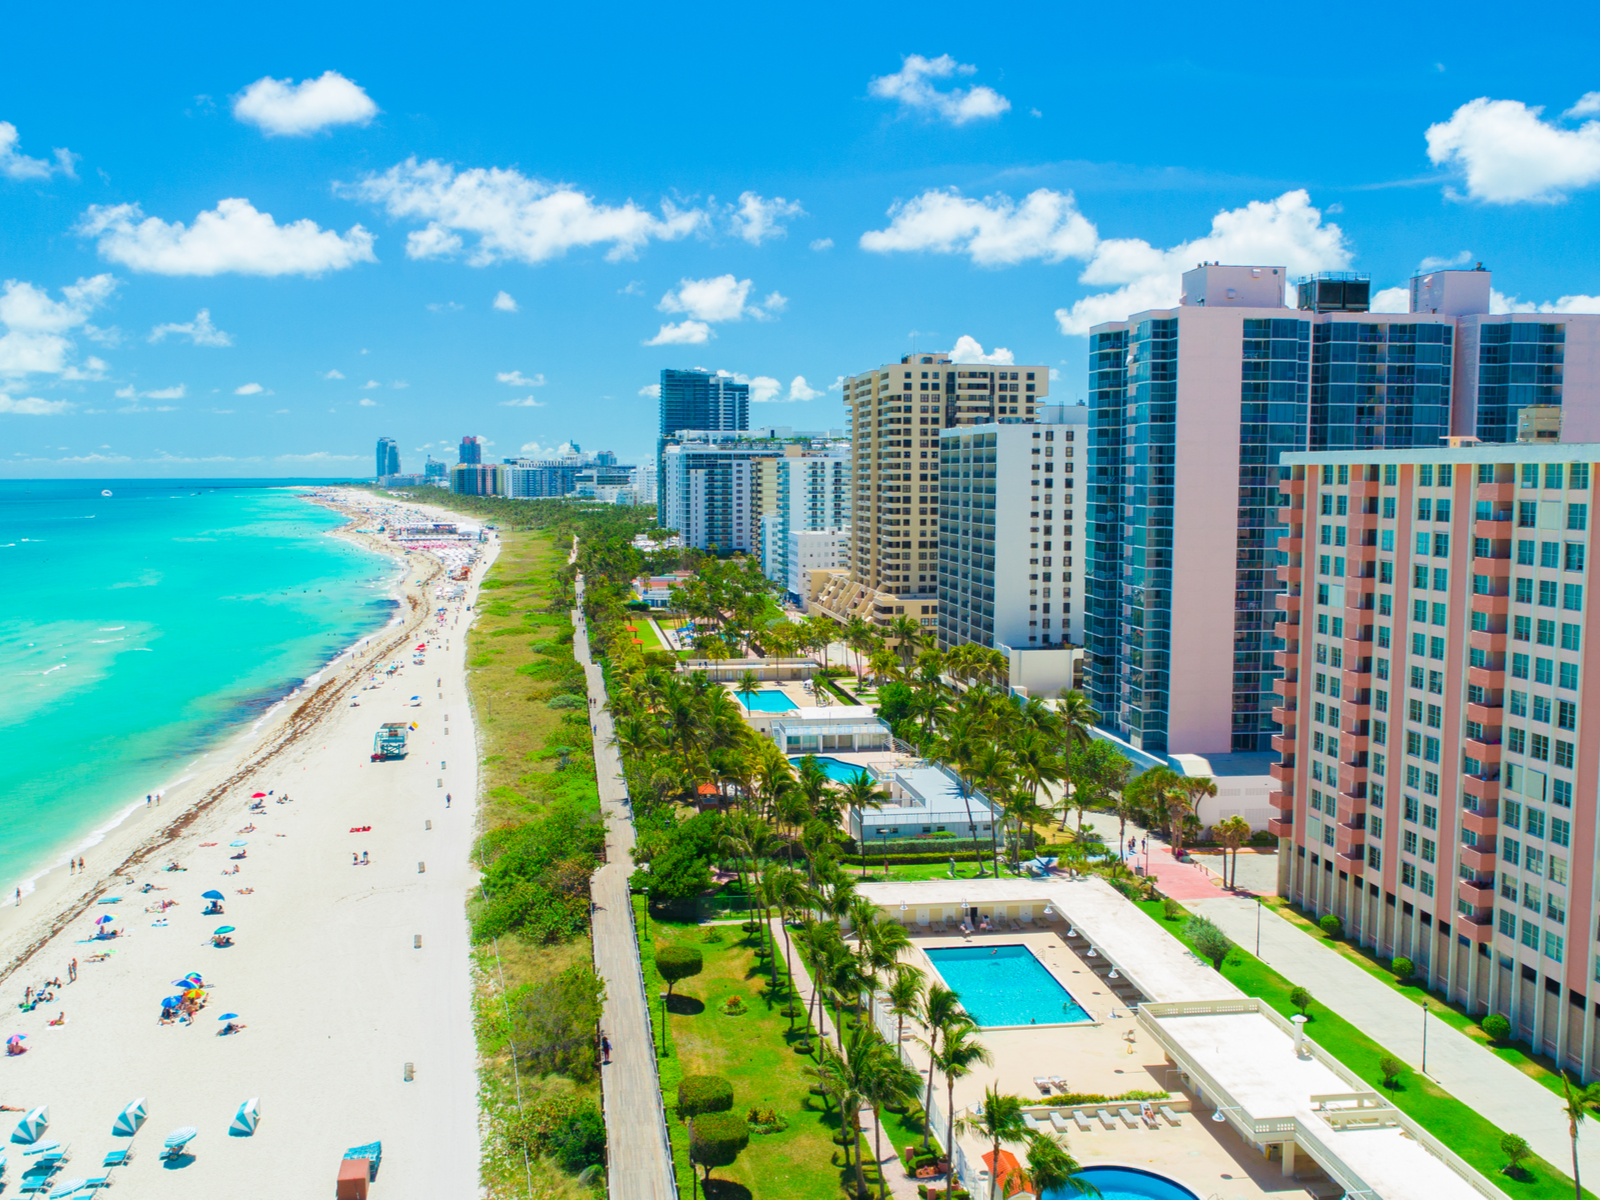 Aerial shot on the beautiful and well-designed landscape at Miami Beach, one of the best beaches in the US, where beach area, walk area, and hotels and resort area are well-placed